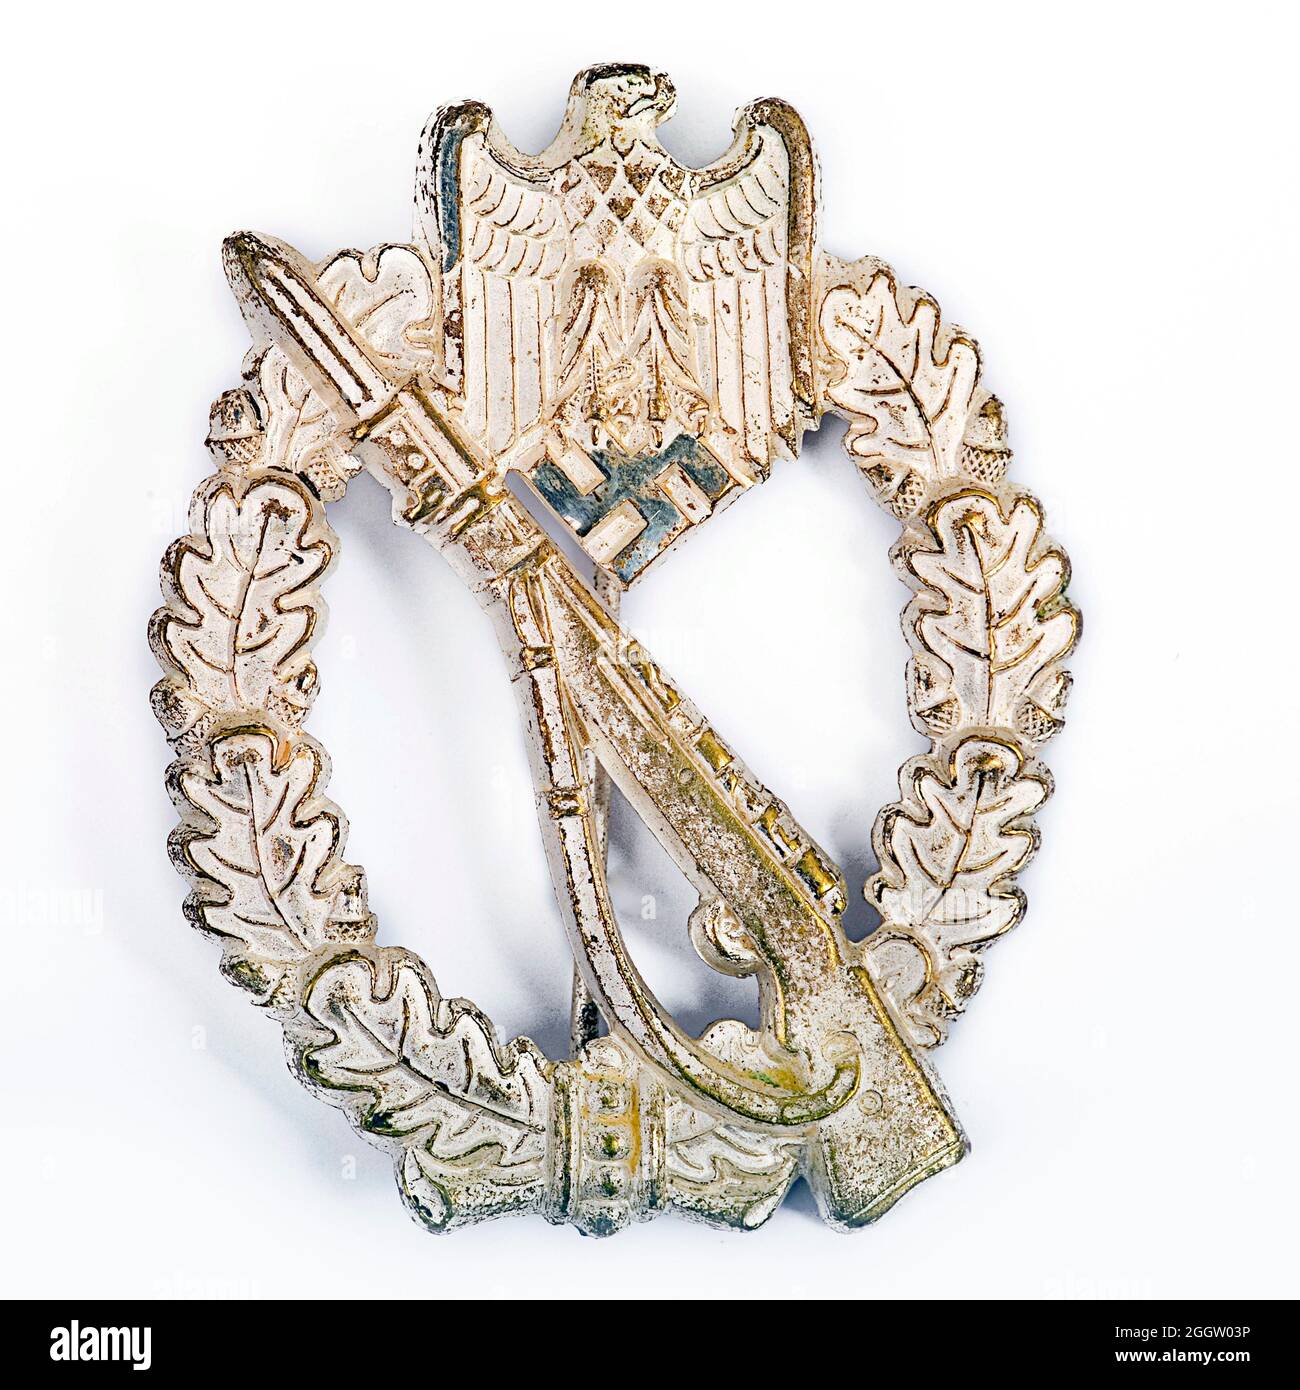 Infantry Assault Badge, flash for soldier in the 2nd World War Stock Photo